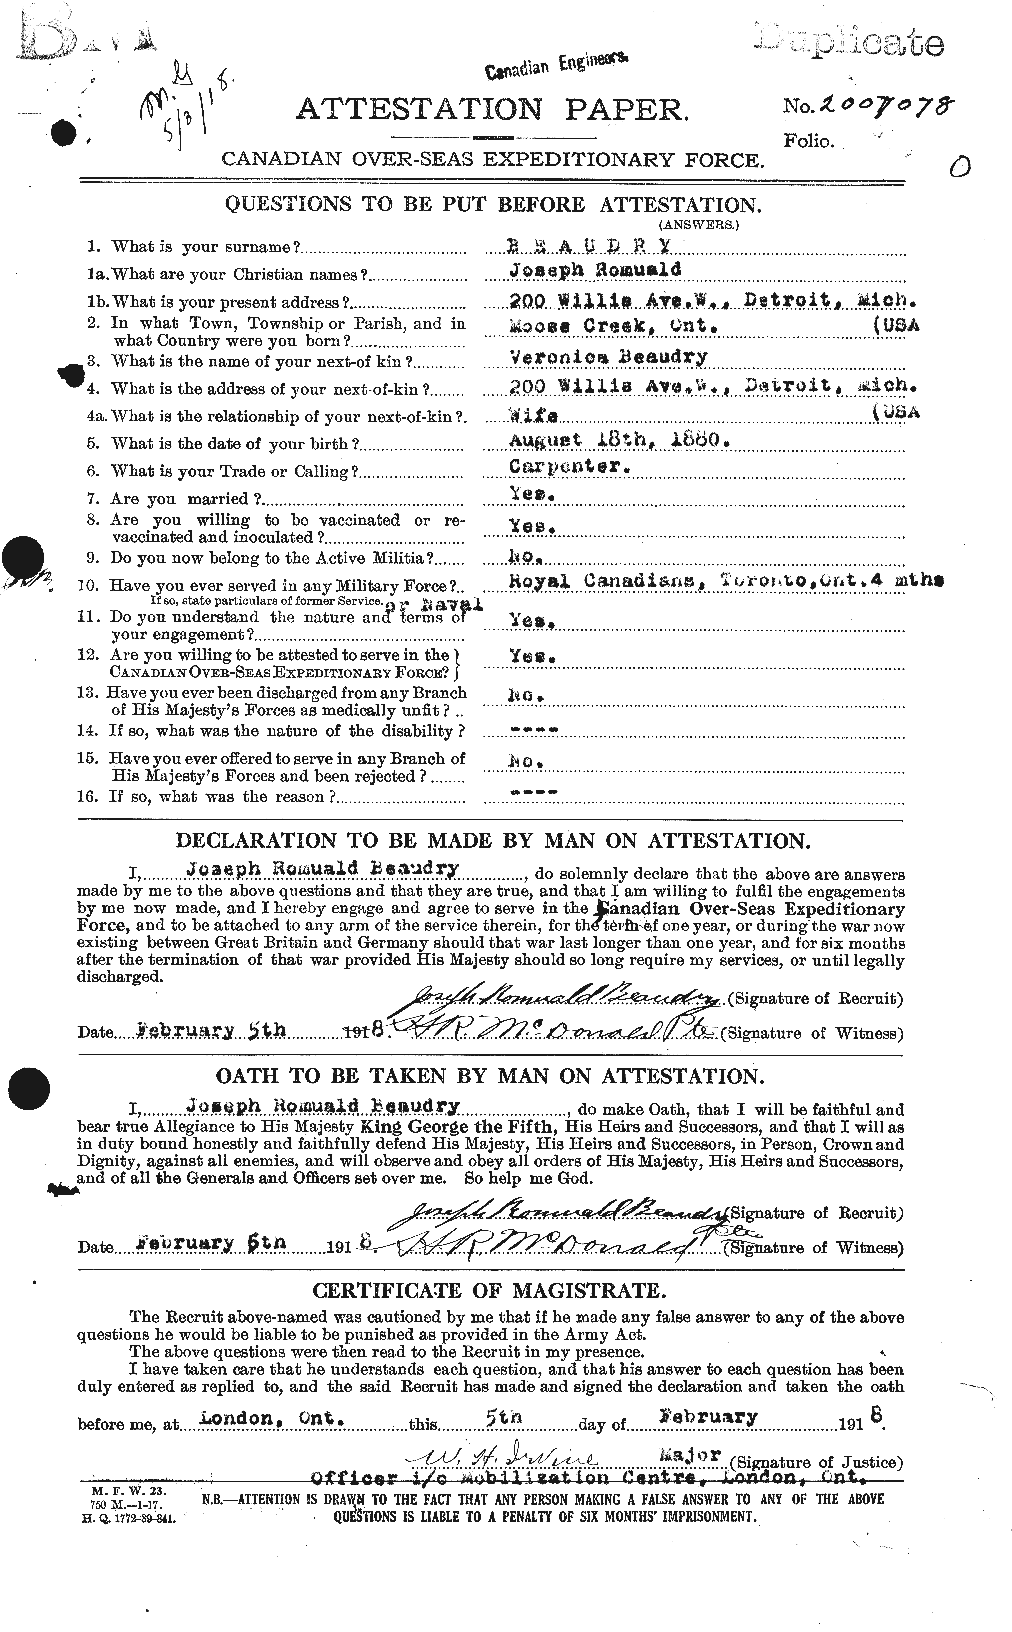 Personnel Records of the First World War - CEF 231383a